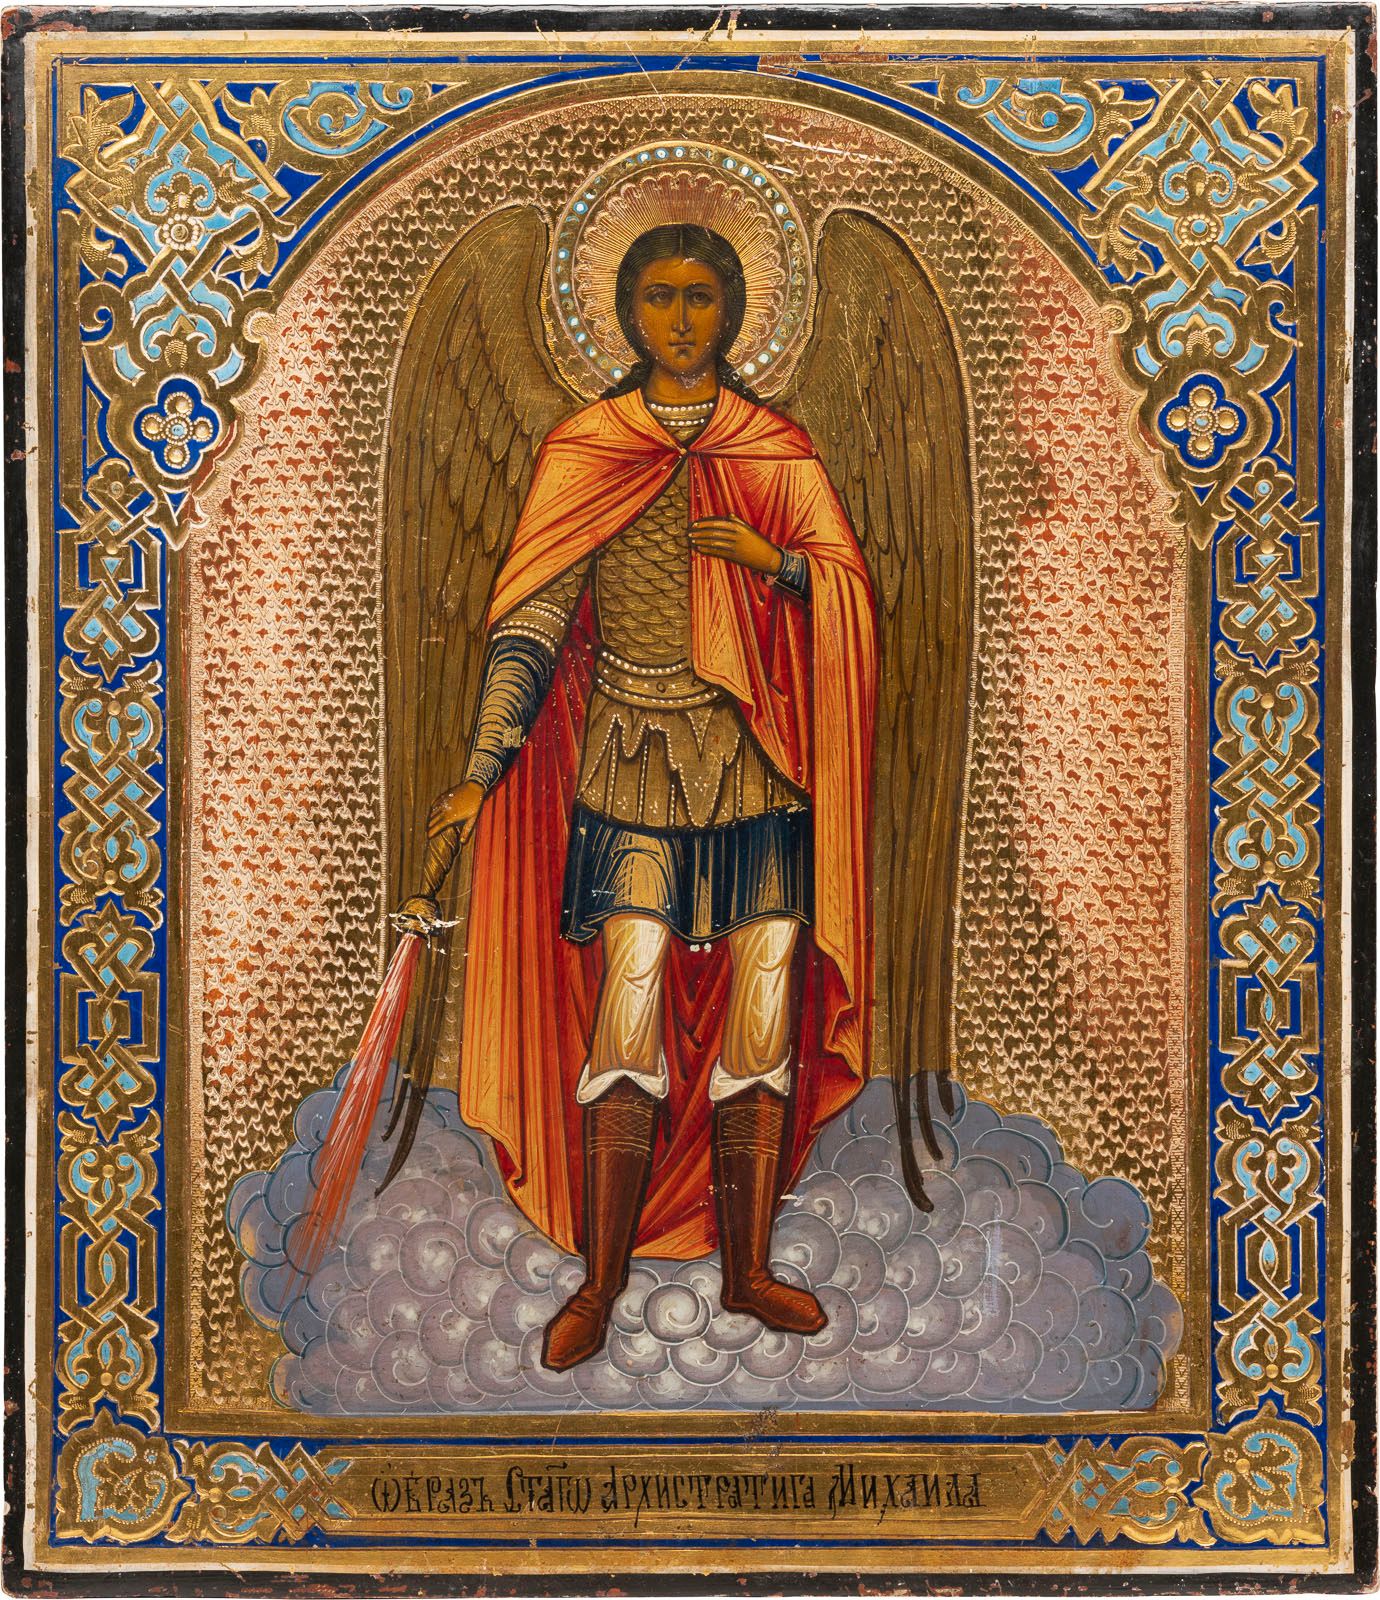 AN ICON SHOWING THE ARCHANGEL MICHAEL UN'ICONA CHE MOSTRA L'ARCANGELO MICHAEL Ru&hellip;